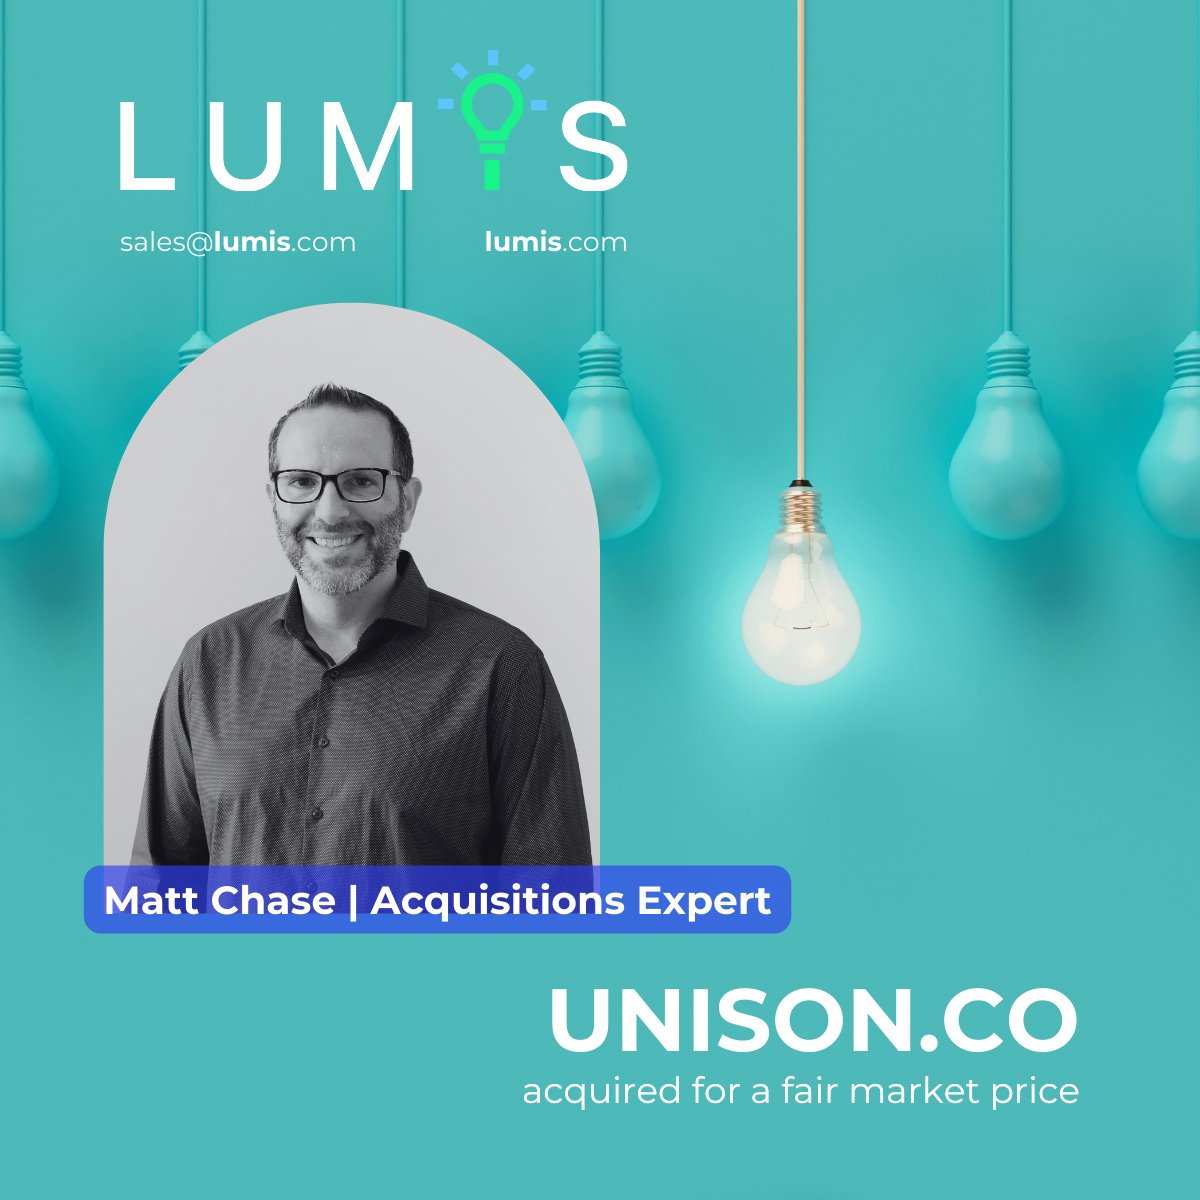 Unison.co has been acquired!

#Lumis